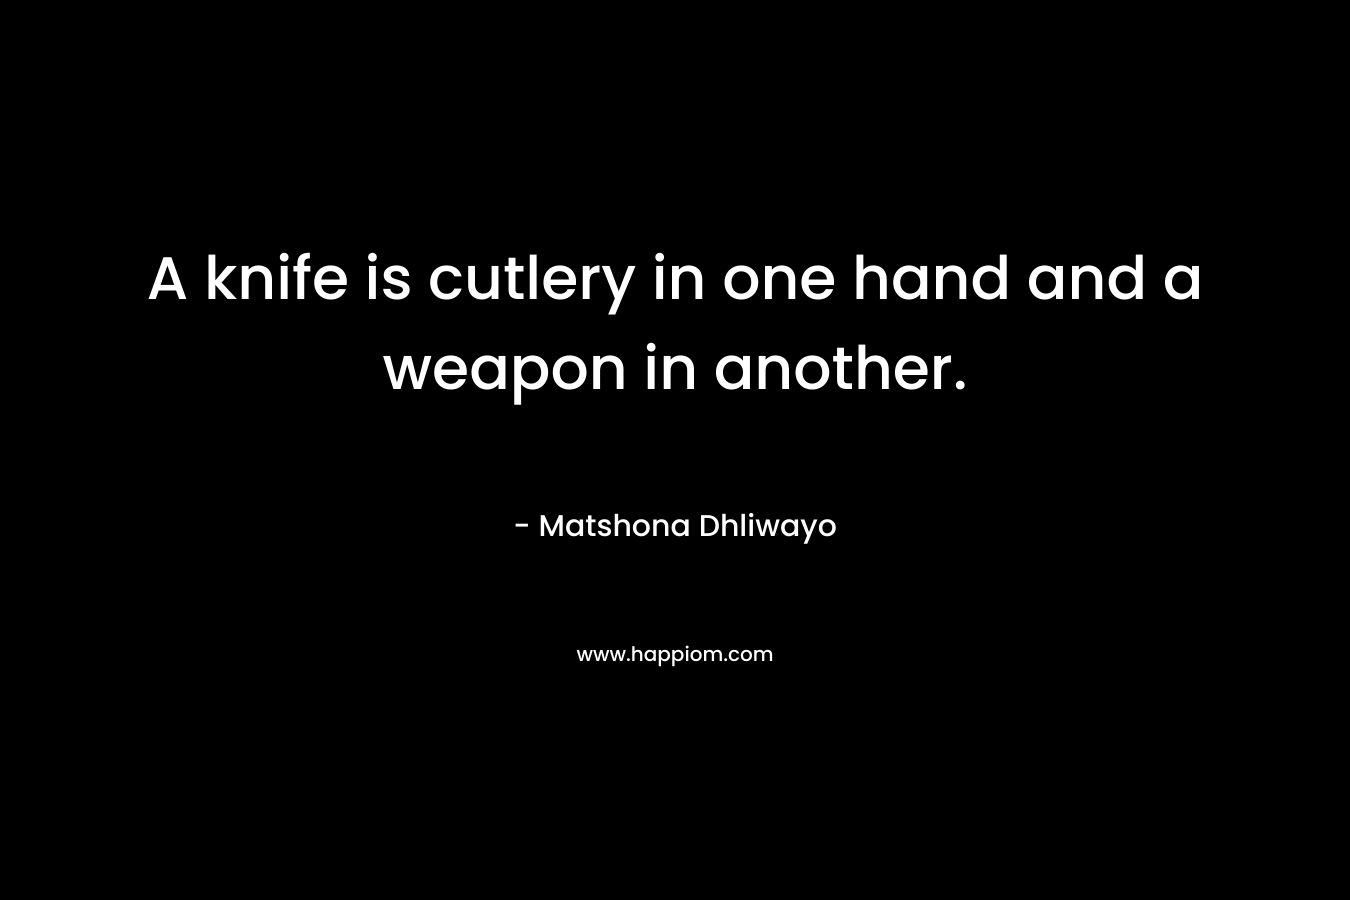 A knife is cutlery in one hand and a weapon in another. – Matshona Dhliwayo